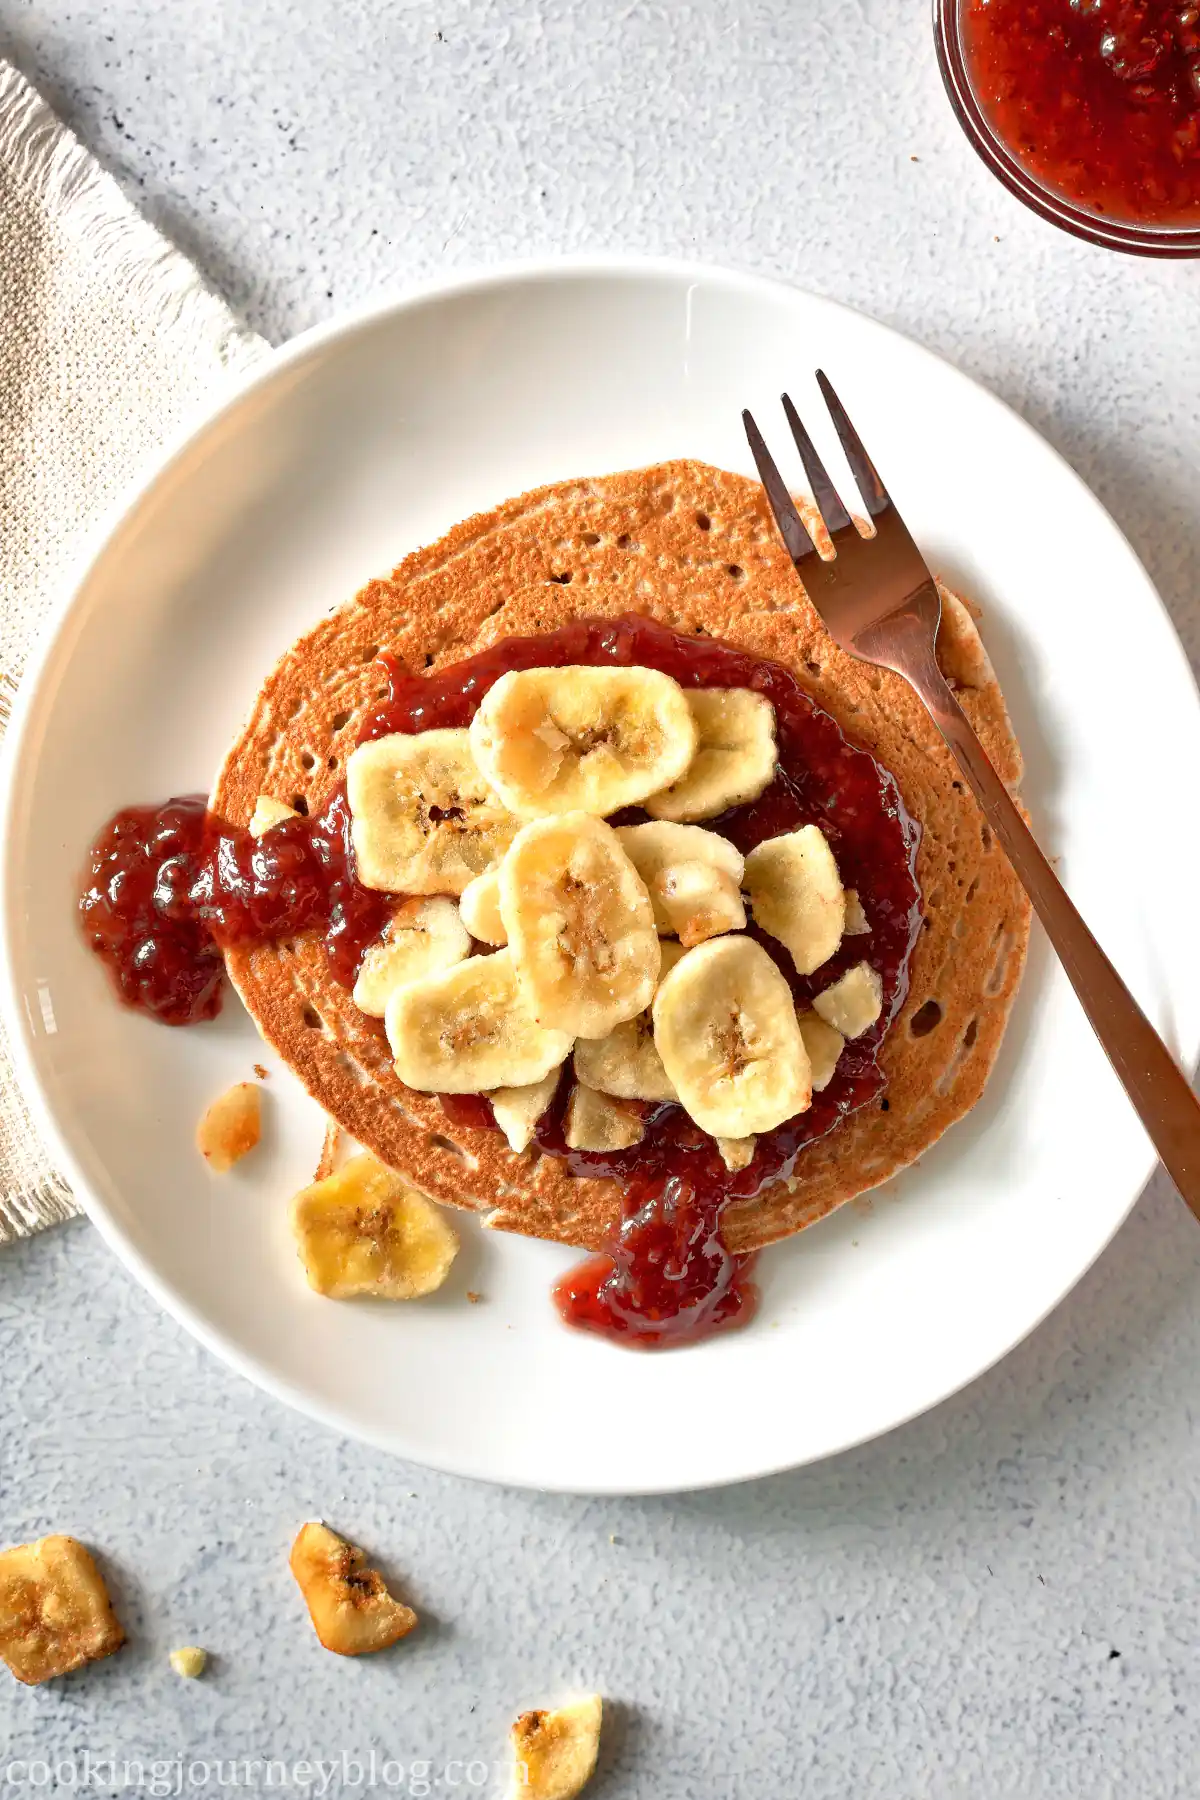 Banana Buckwheat Pancakes served with jam and bananas on a white plate with a fork